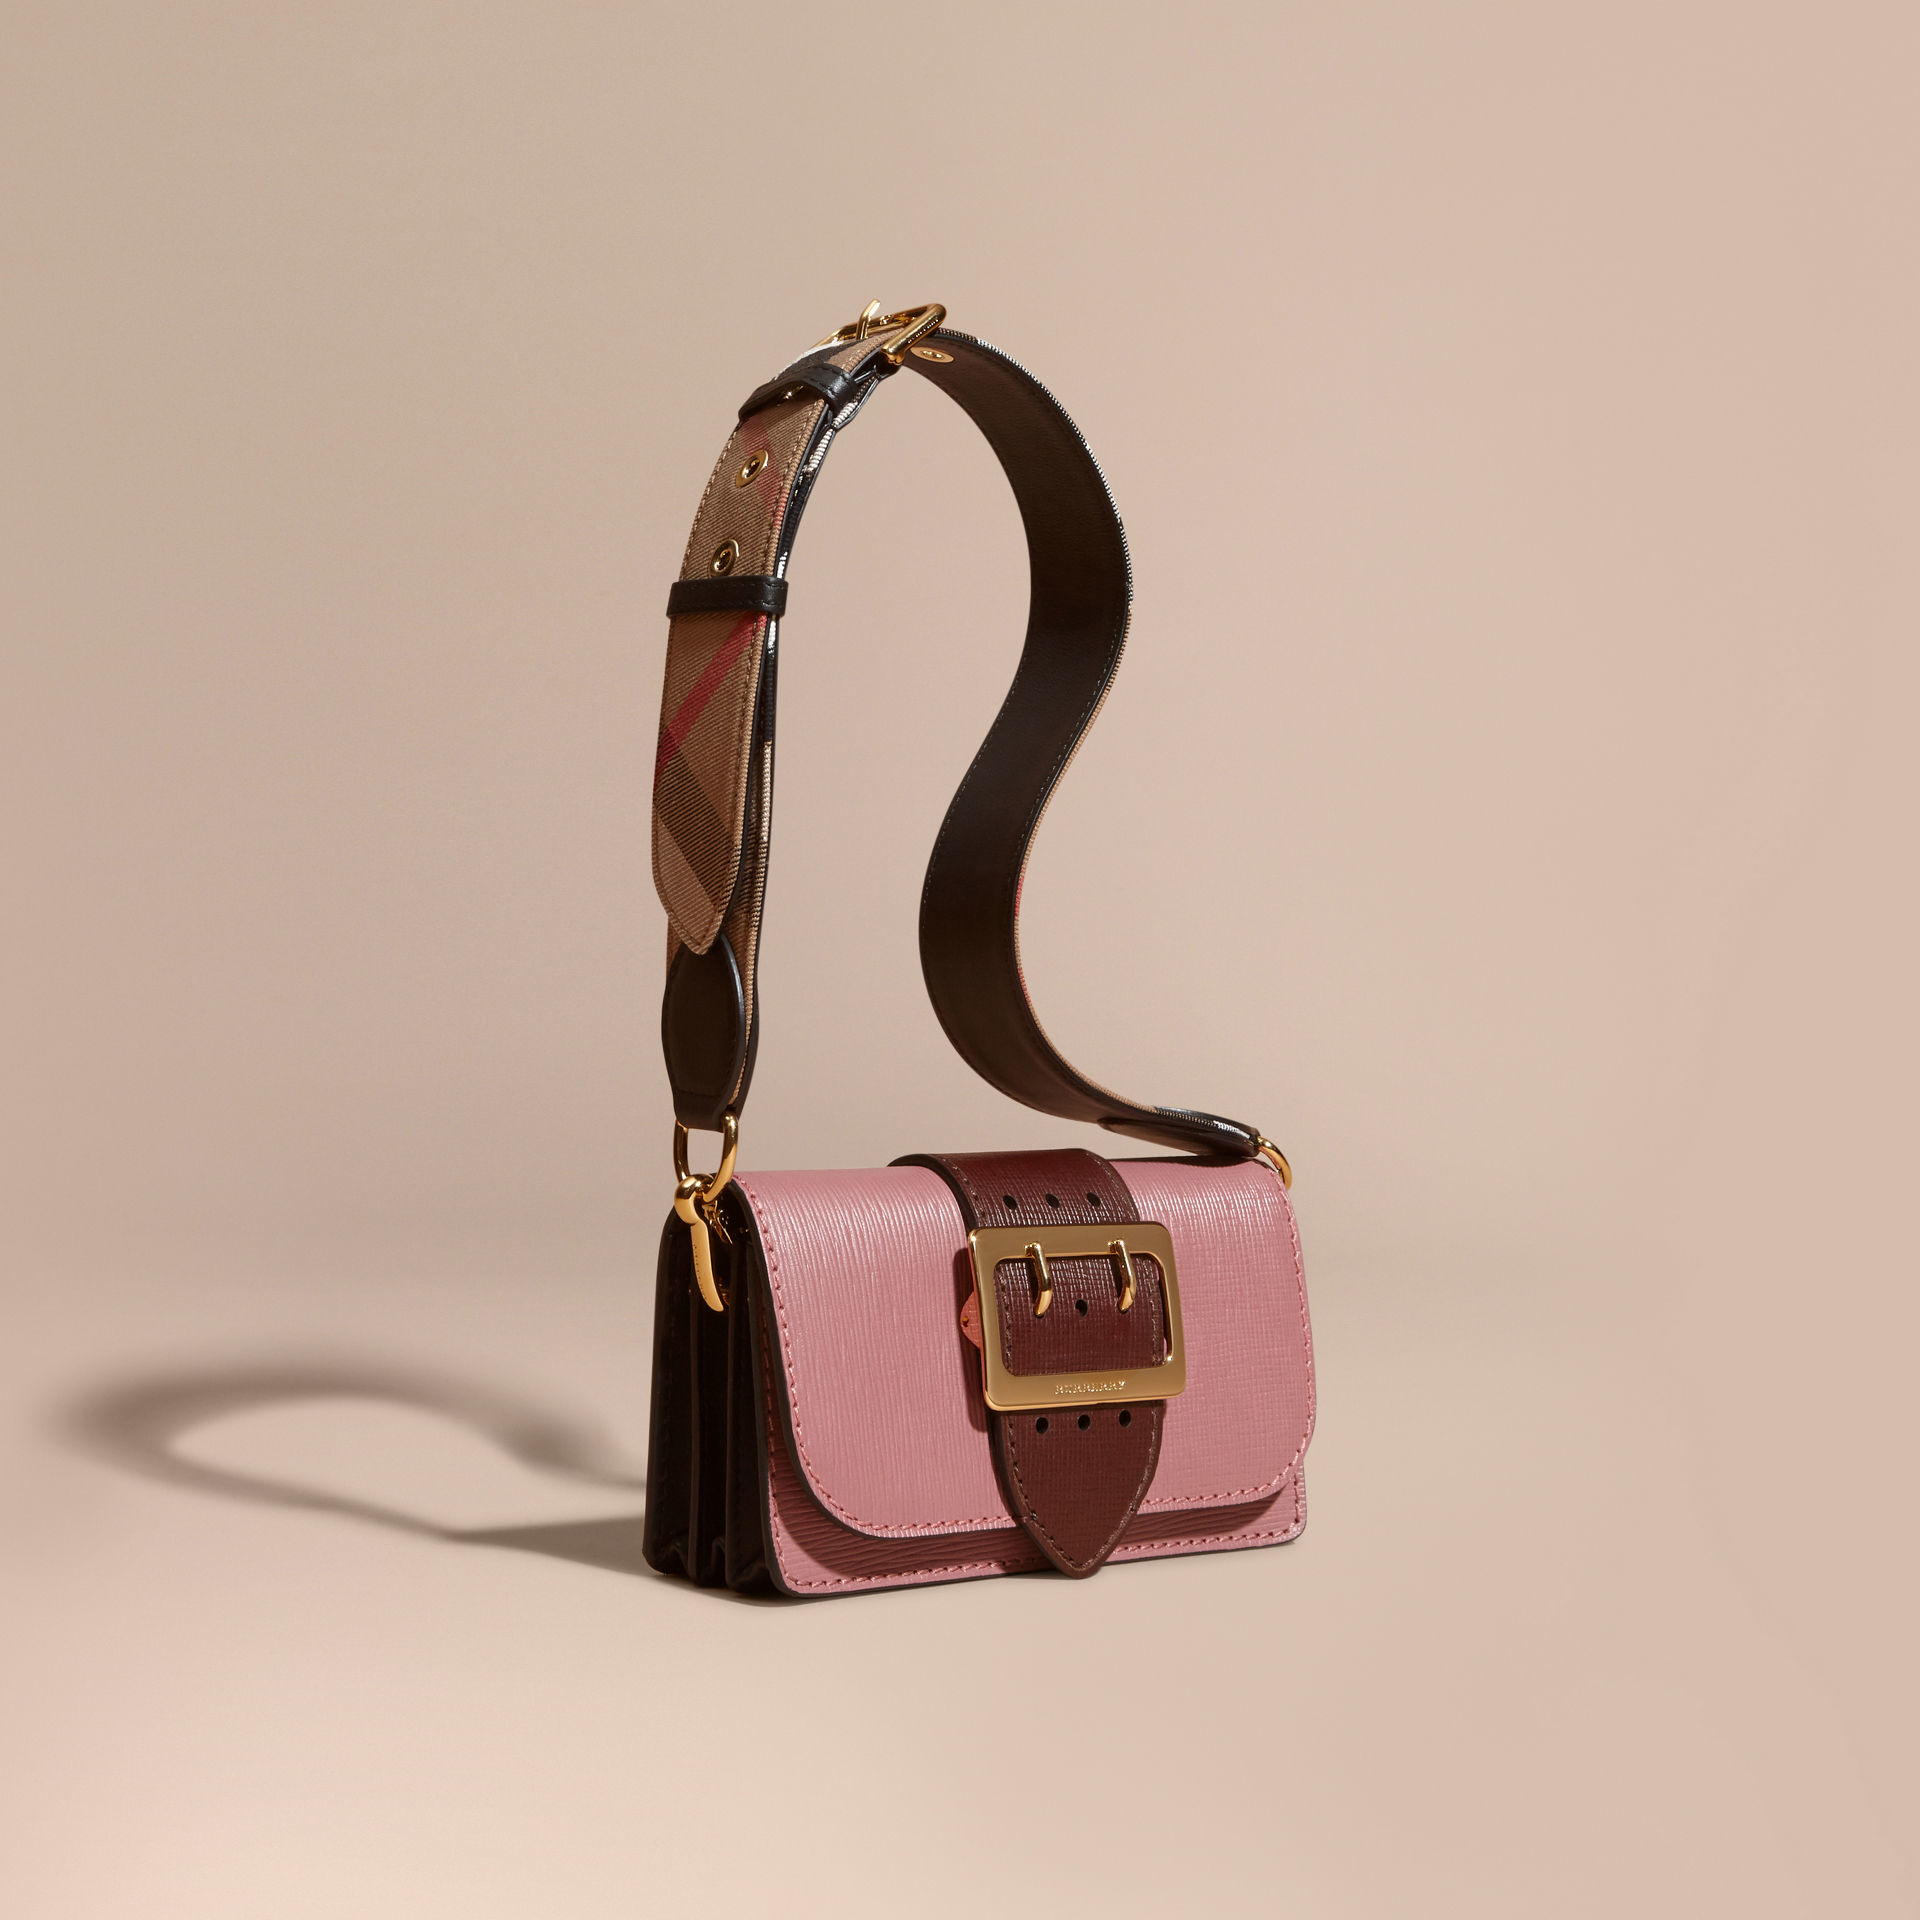 Burberry Small Buckle Leather Shoulder Bag in Pink - Lyst